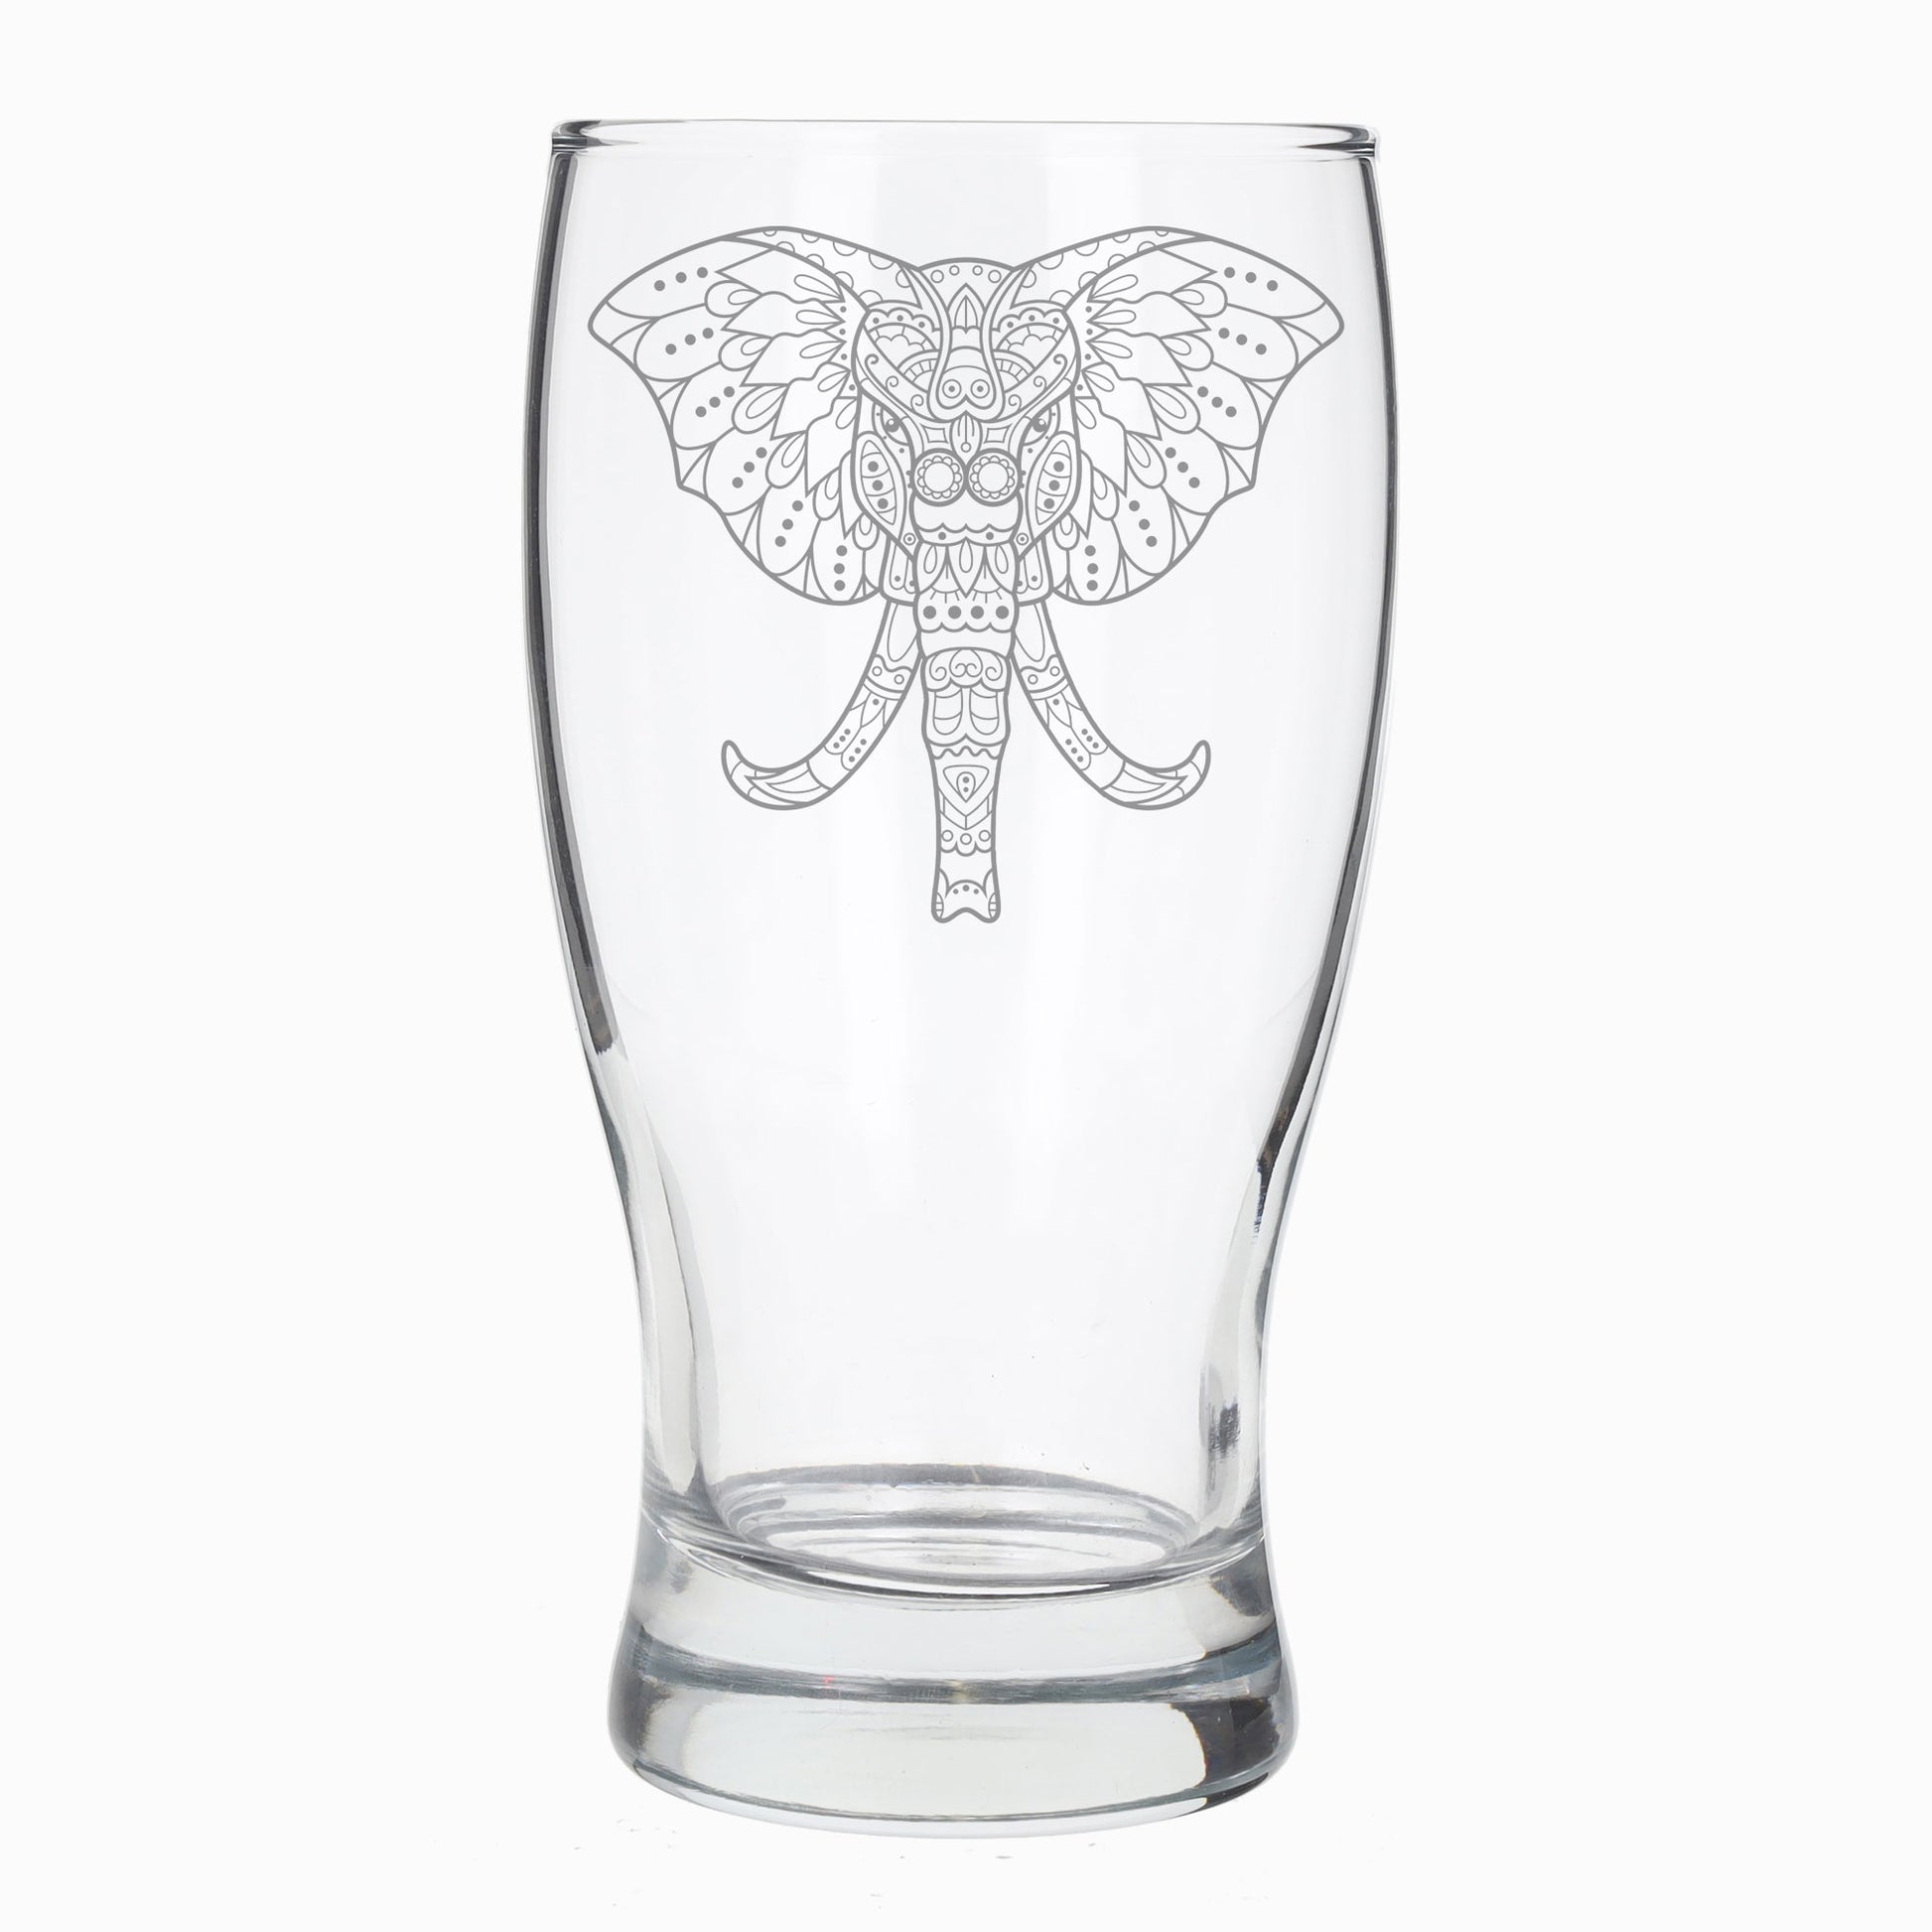 Elephant Mandala Engraved Beer Glass and/or Coaster Set  - Always Looking Good - Beer Glass Only  